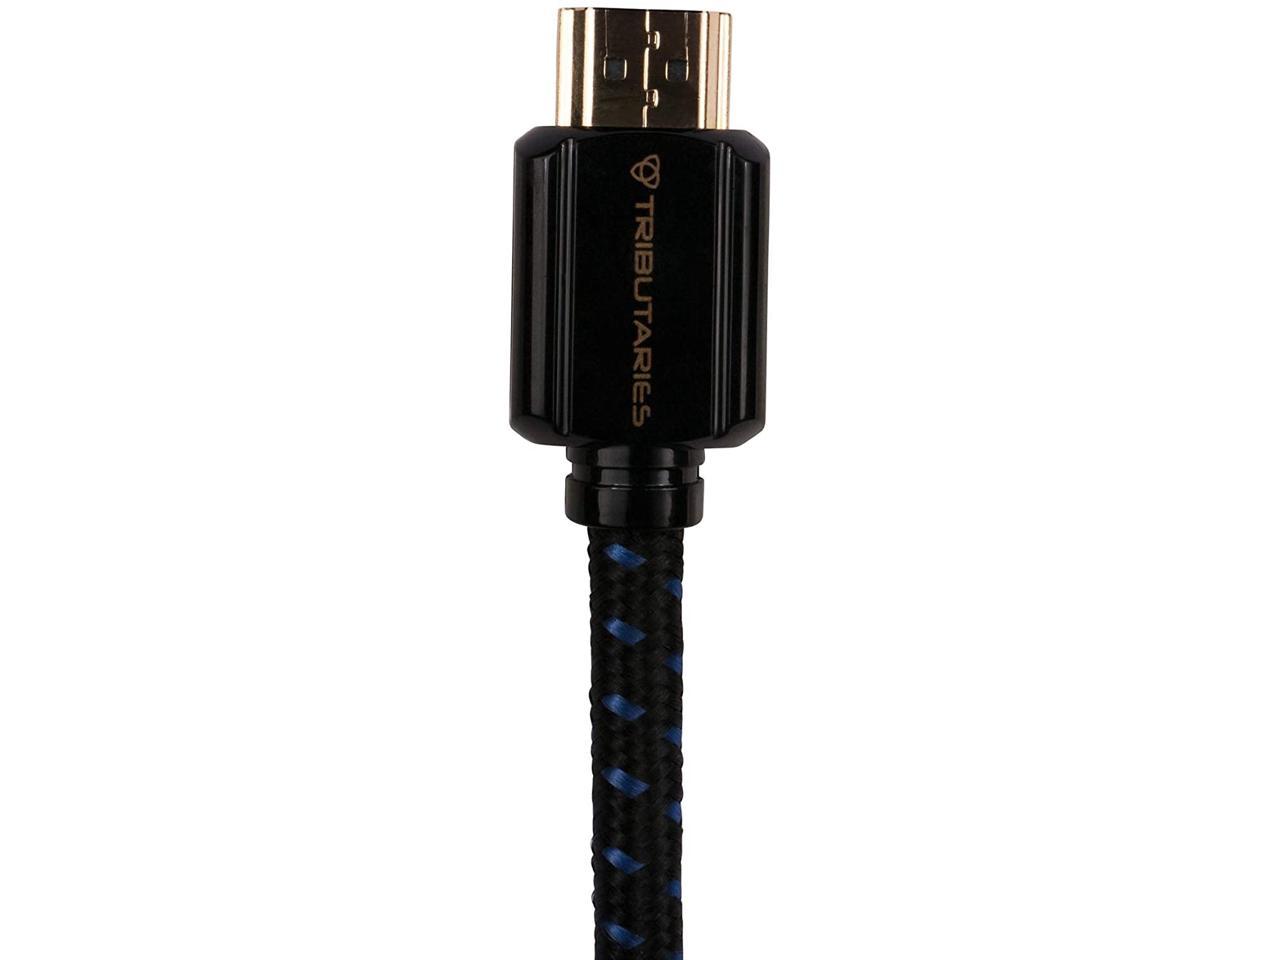 Tributaries UHD Pro 1.0M High Speed with Ethernet Cable Supports UHD HDMI 4K/60 Signals 